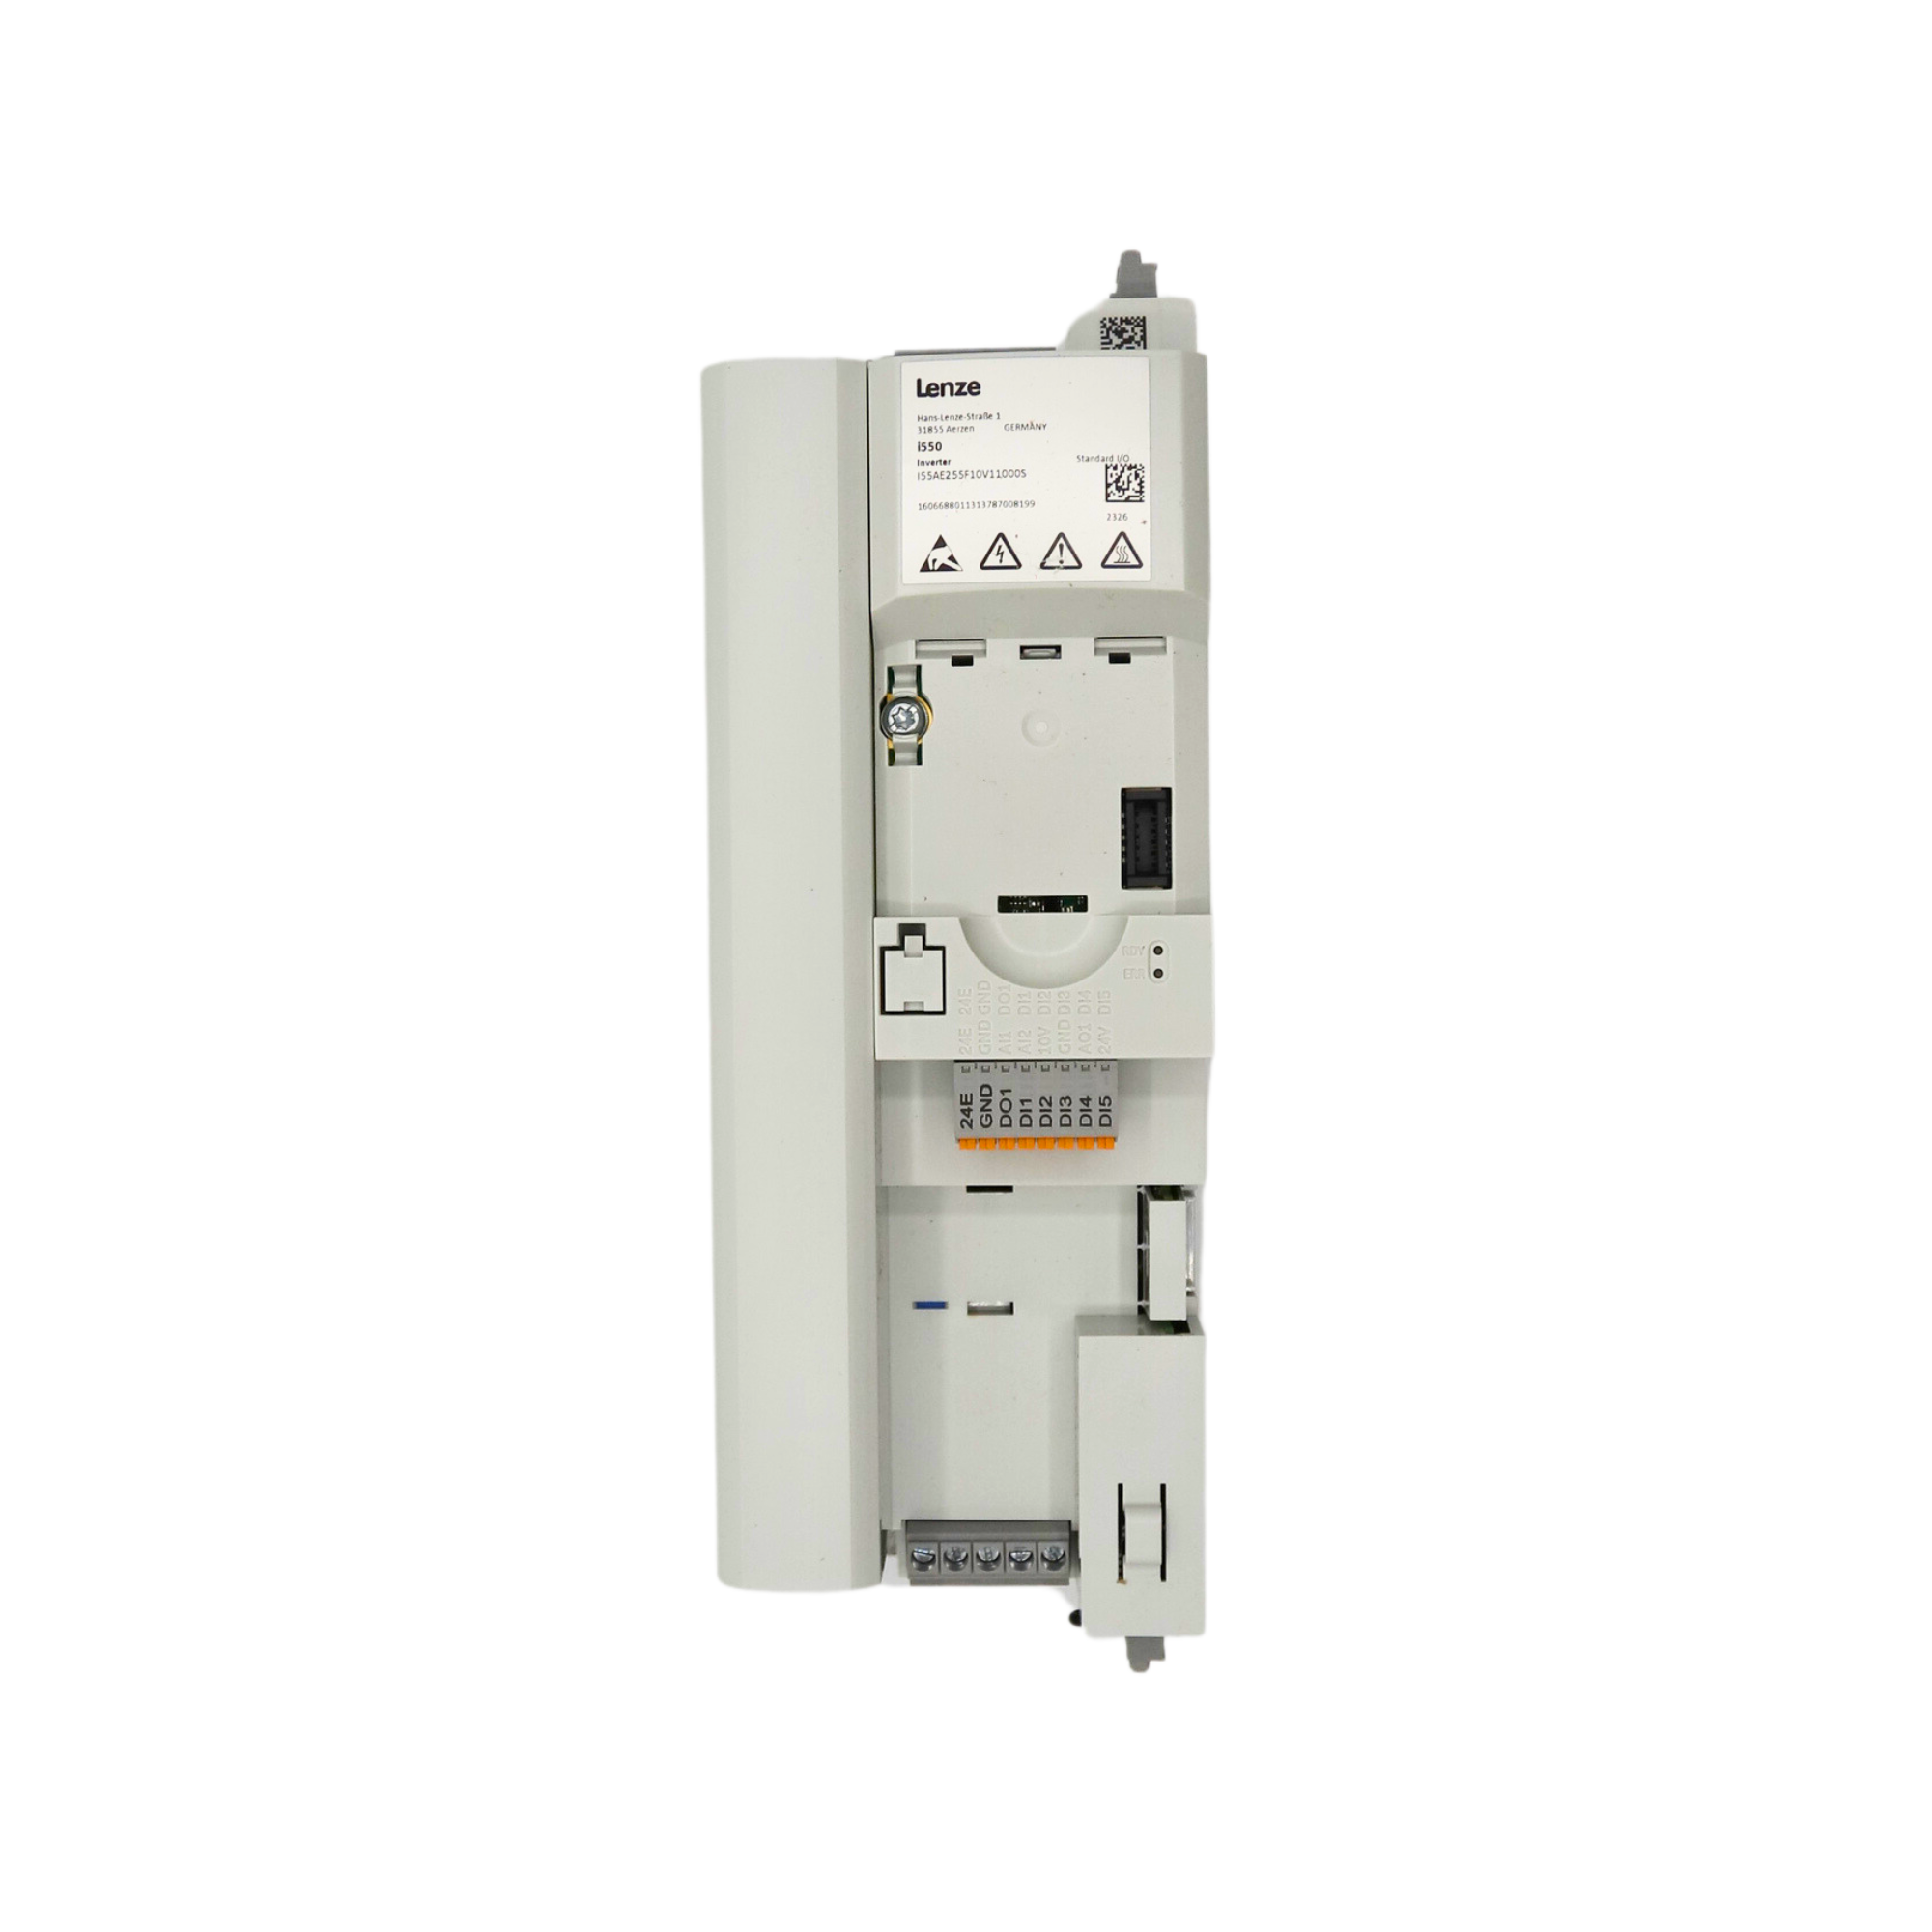 Lenze | i550 7.5hp Cabinet mount, fieldbus and STO capable, 480volt 5digital inputs, 2 analog inputs, 1 digital output 1 analog Output, 1 relay | I55AE255F10V11000S - front view